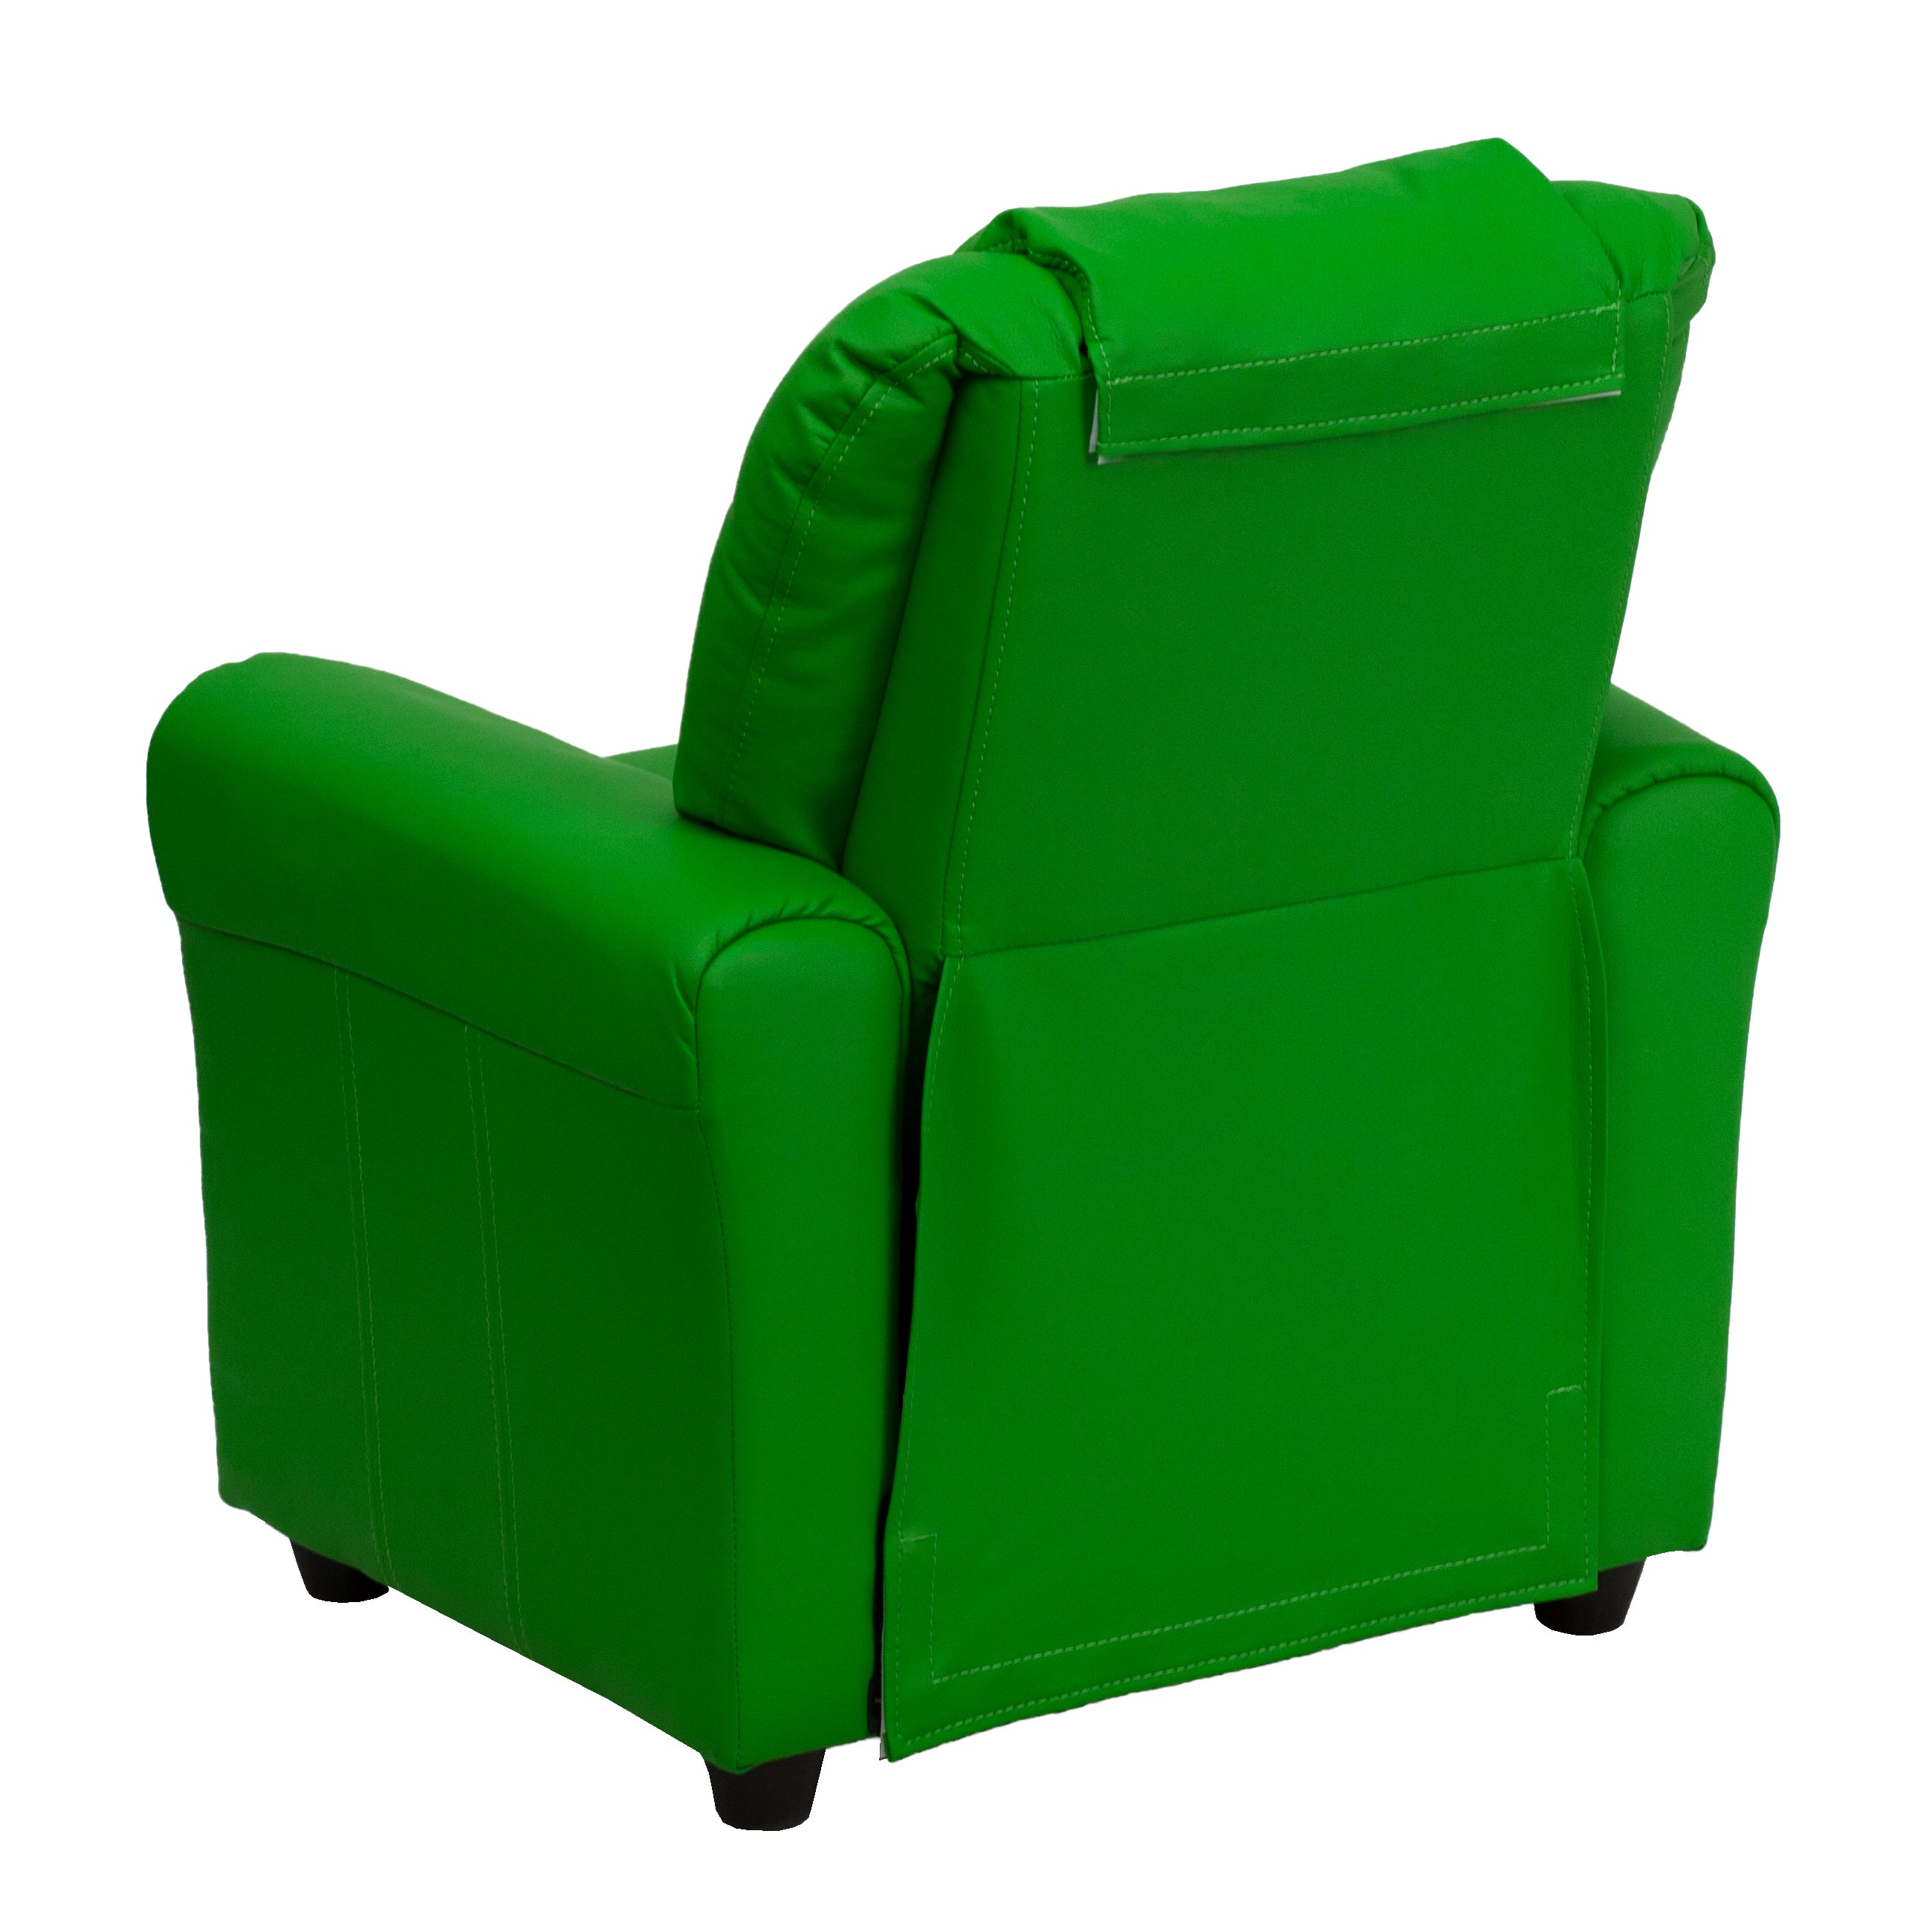 Contemporary Kids Recliner with Cup Holder and Headrest-Kids Recliner-Flash Furniture-Wall2Wall Furnishings